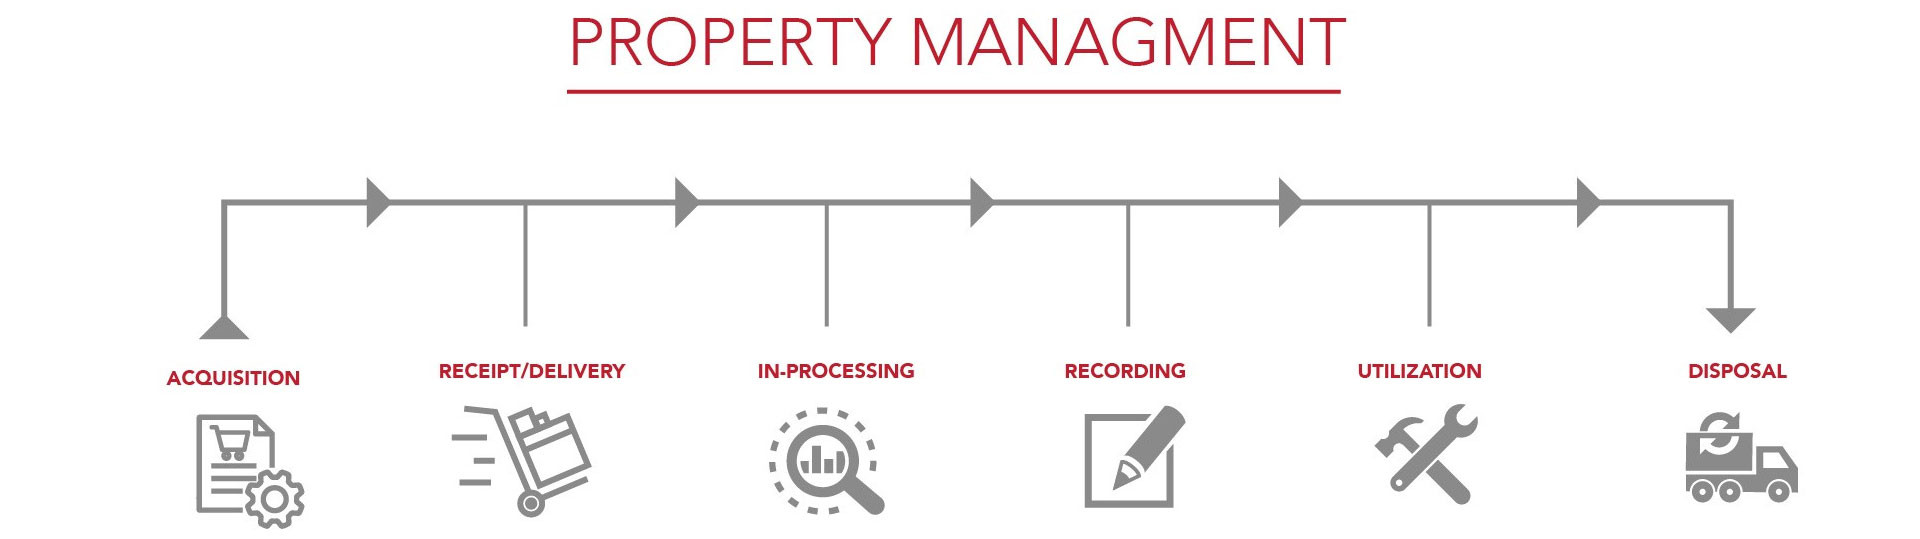 JLAB Property steps graphic All Government equipment goes through this cycle.